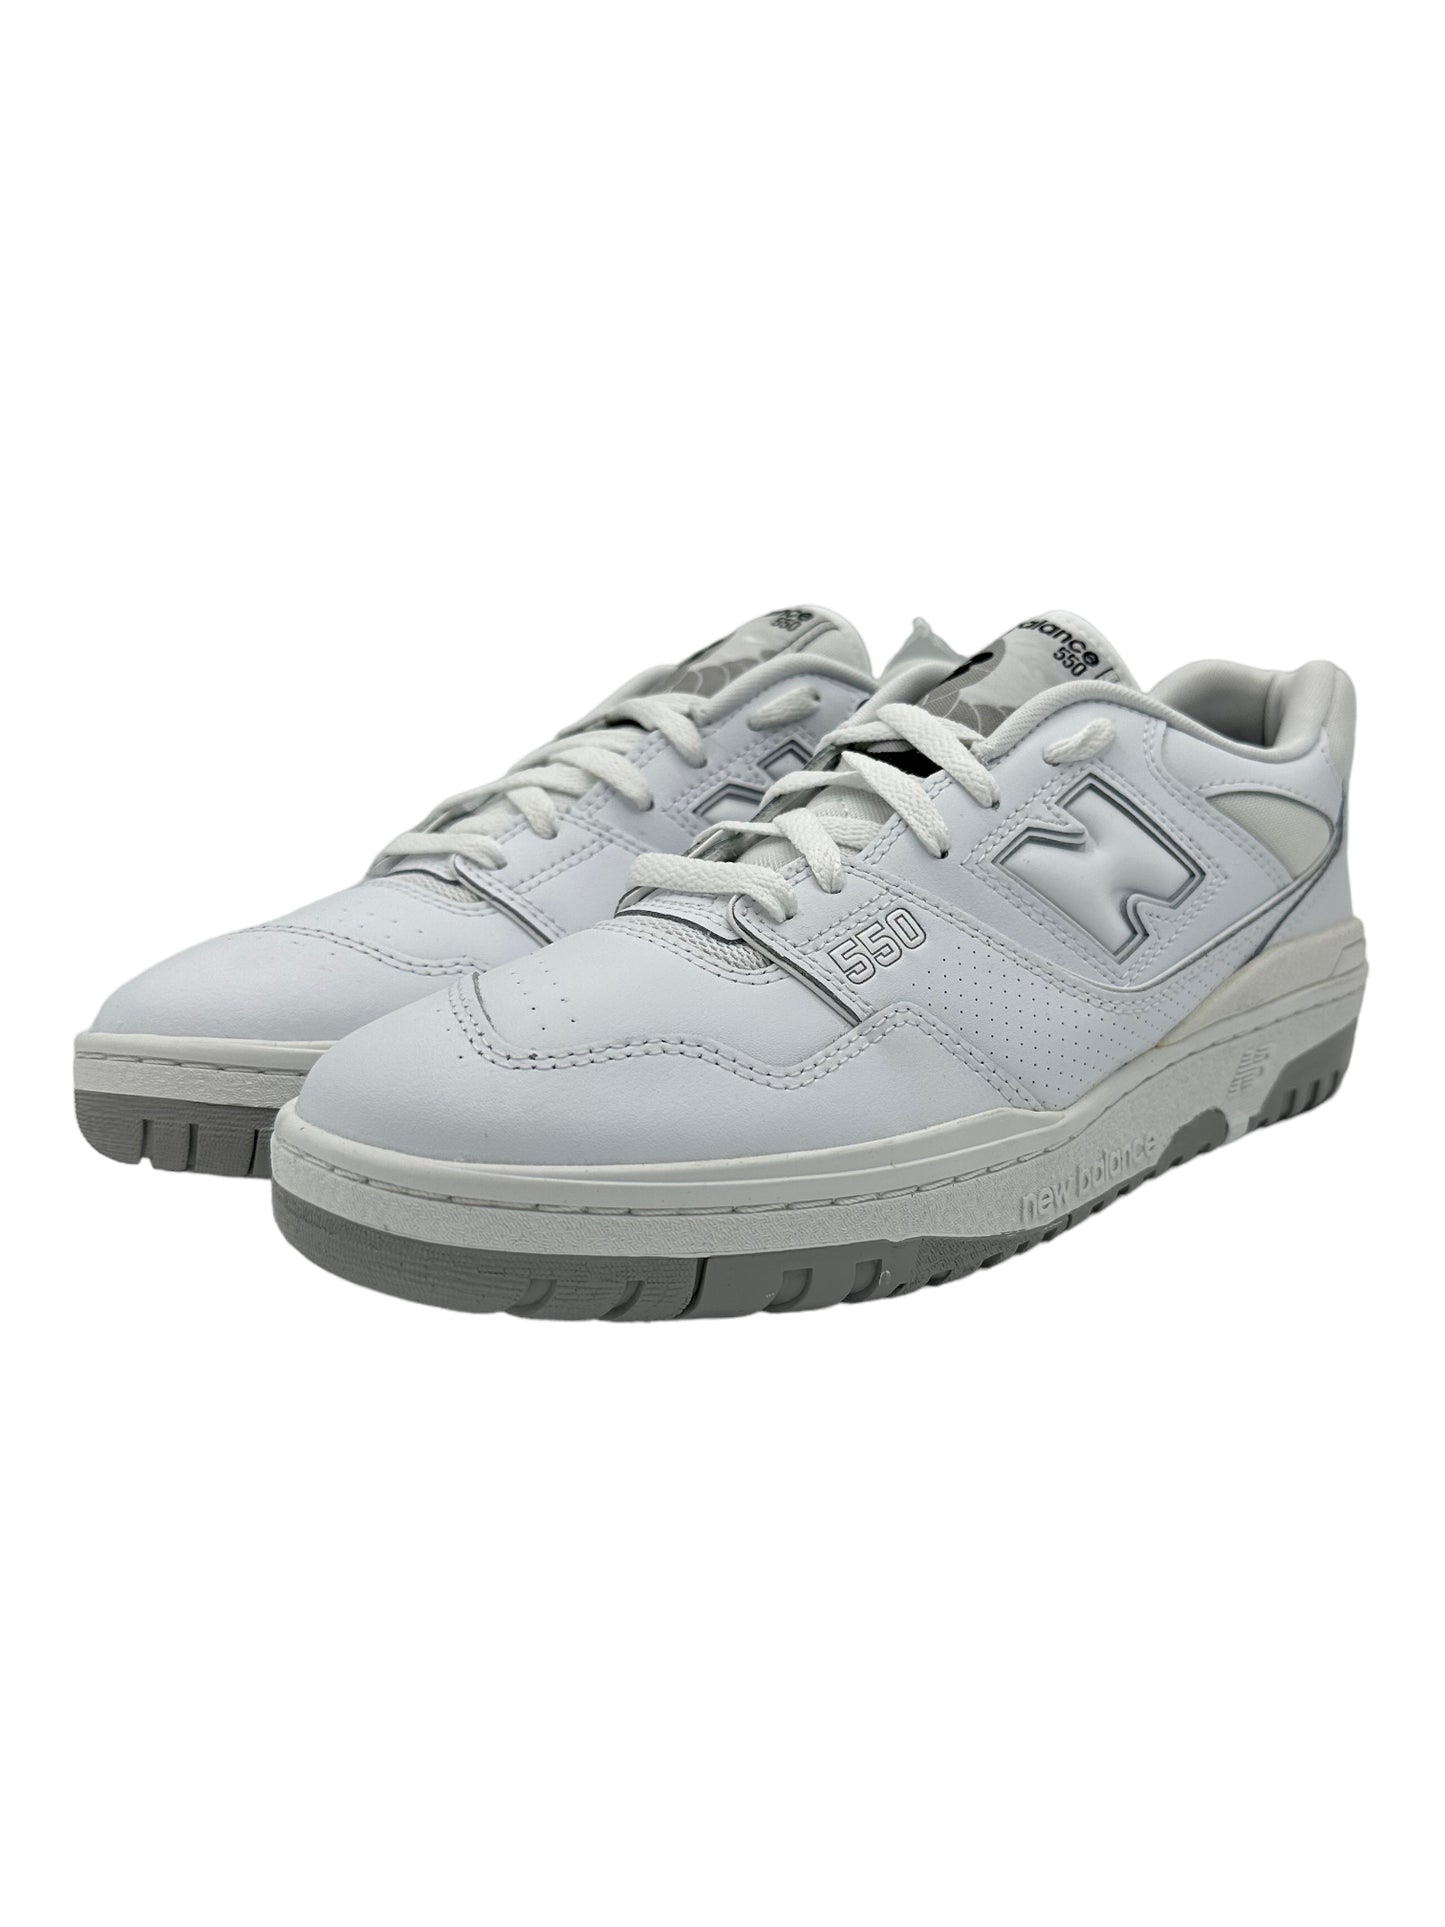 New Balance 550 White/Grey Sneakers - Genuine Design Luxury Consignment for Men. New & Pre-Owned Clothing, Shoes, & Accessories. Calgary, Canada